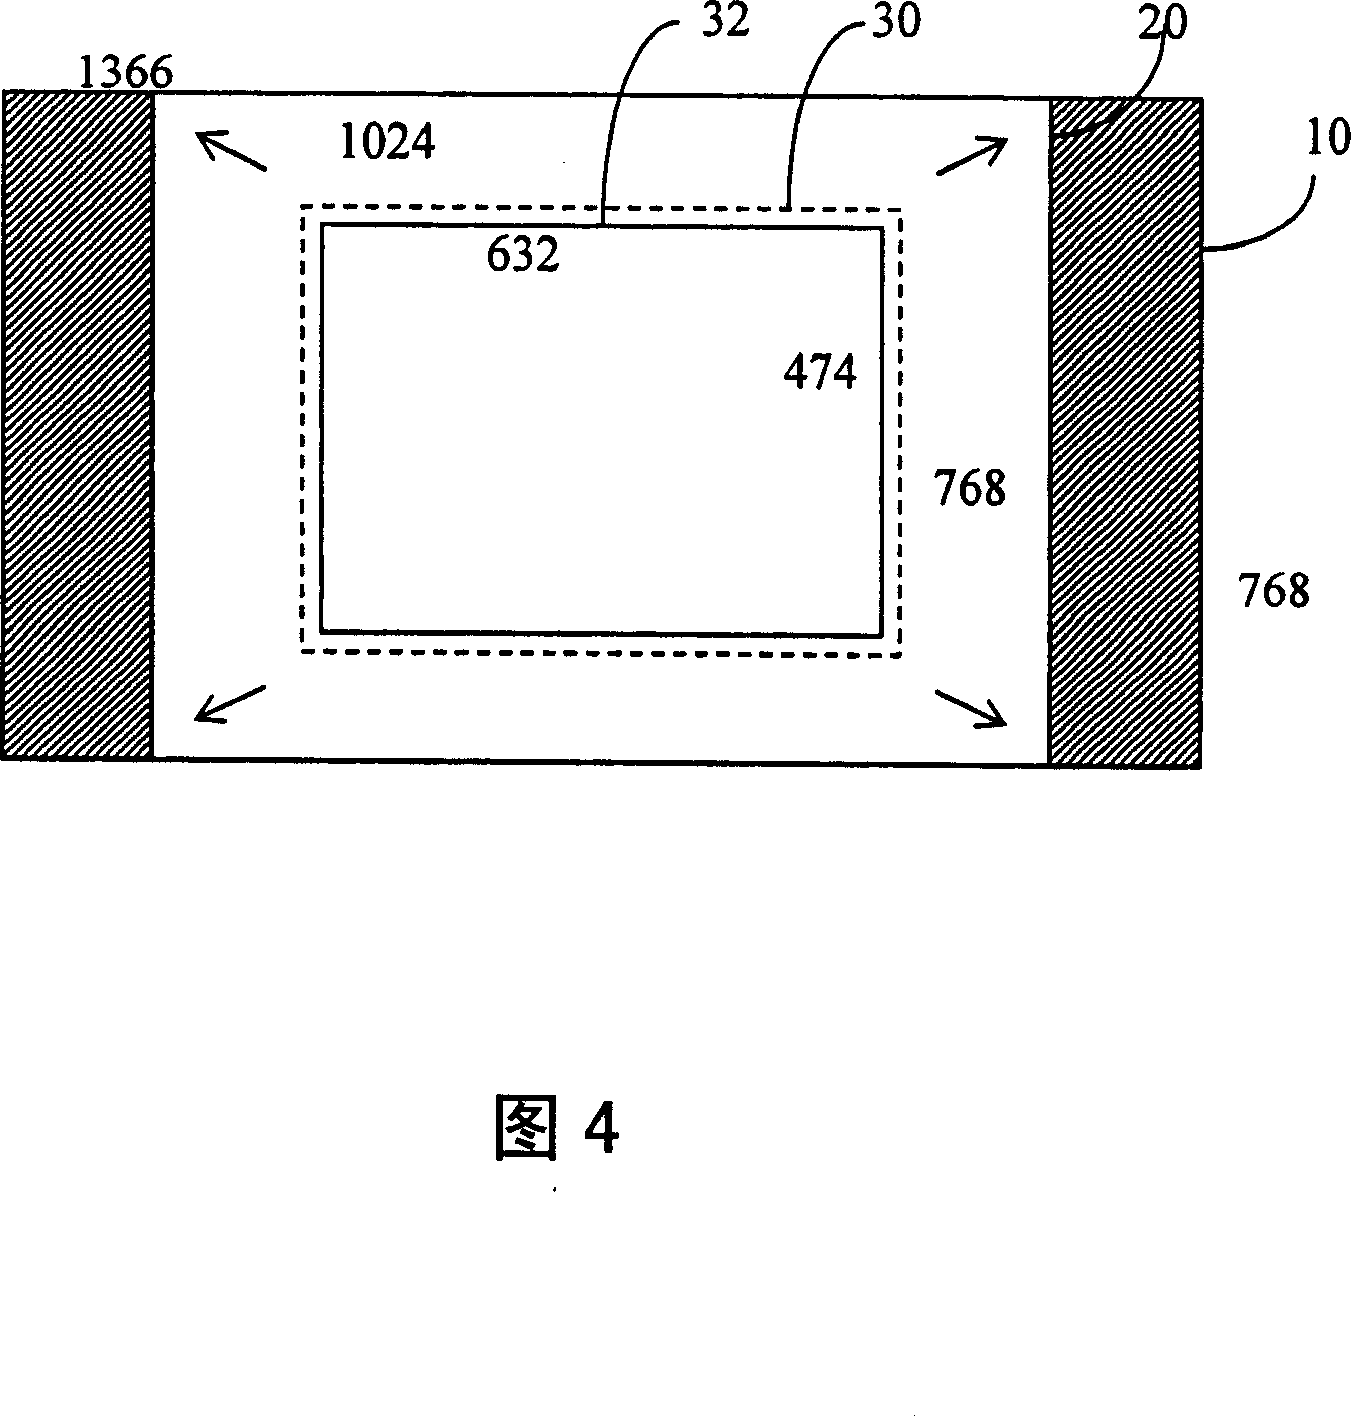 Method for scaling and cropping images for television display